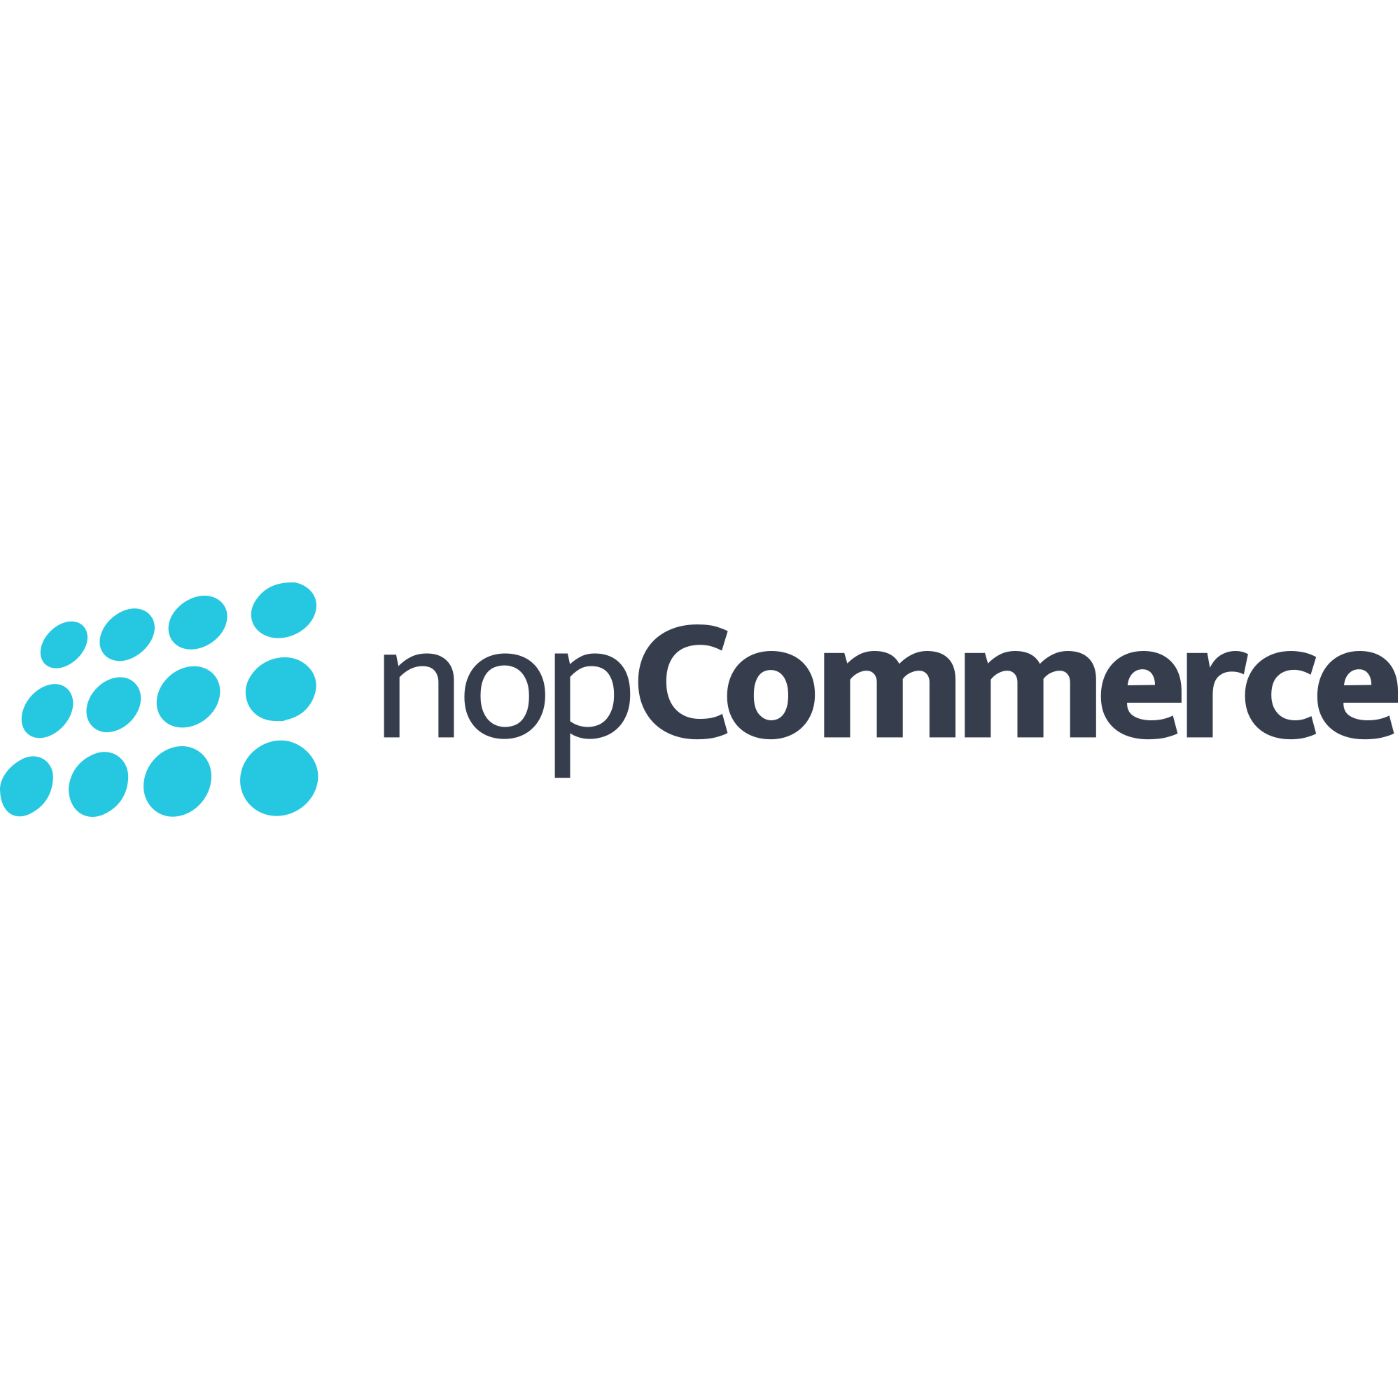 nopCommerce HackerNoon profile picture